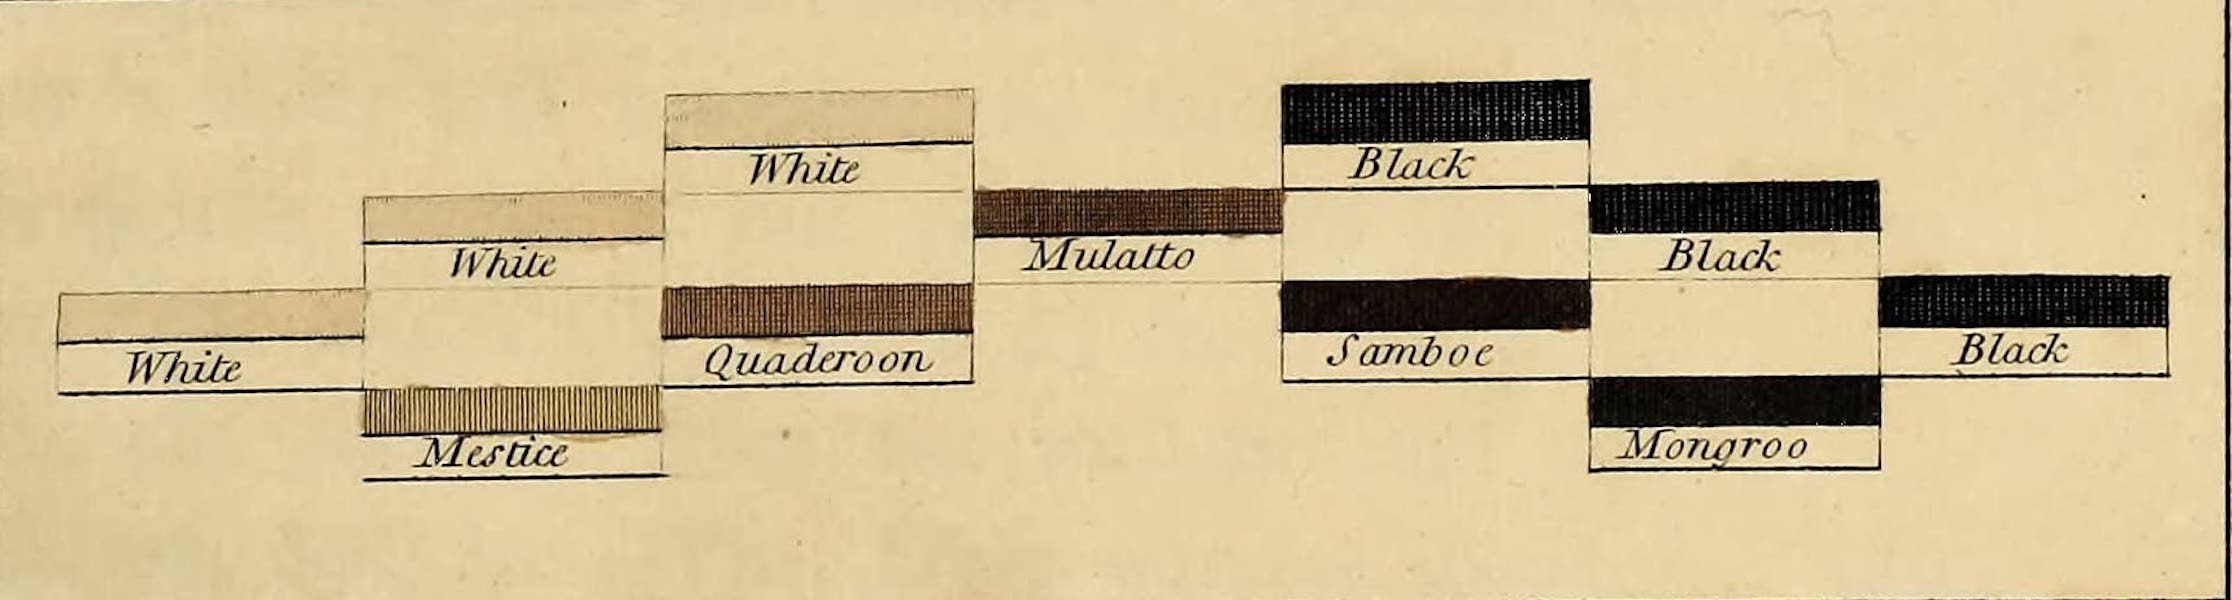 Narrative, of a Five Years Expedition Vol. 2 - Graduation of Shades between Europe & Africa (1796)